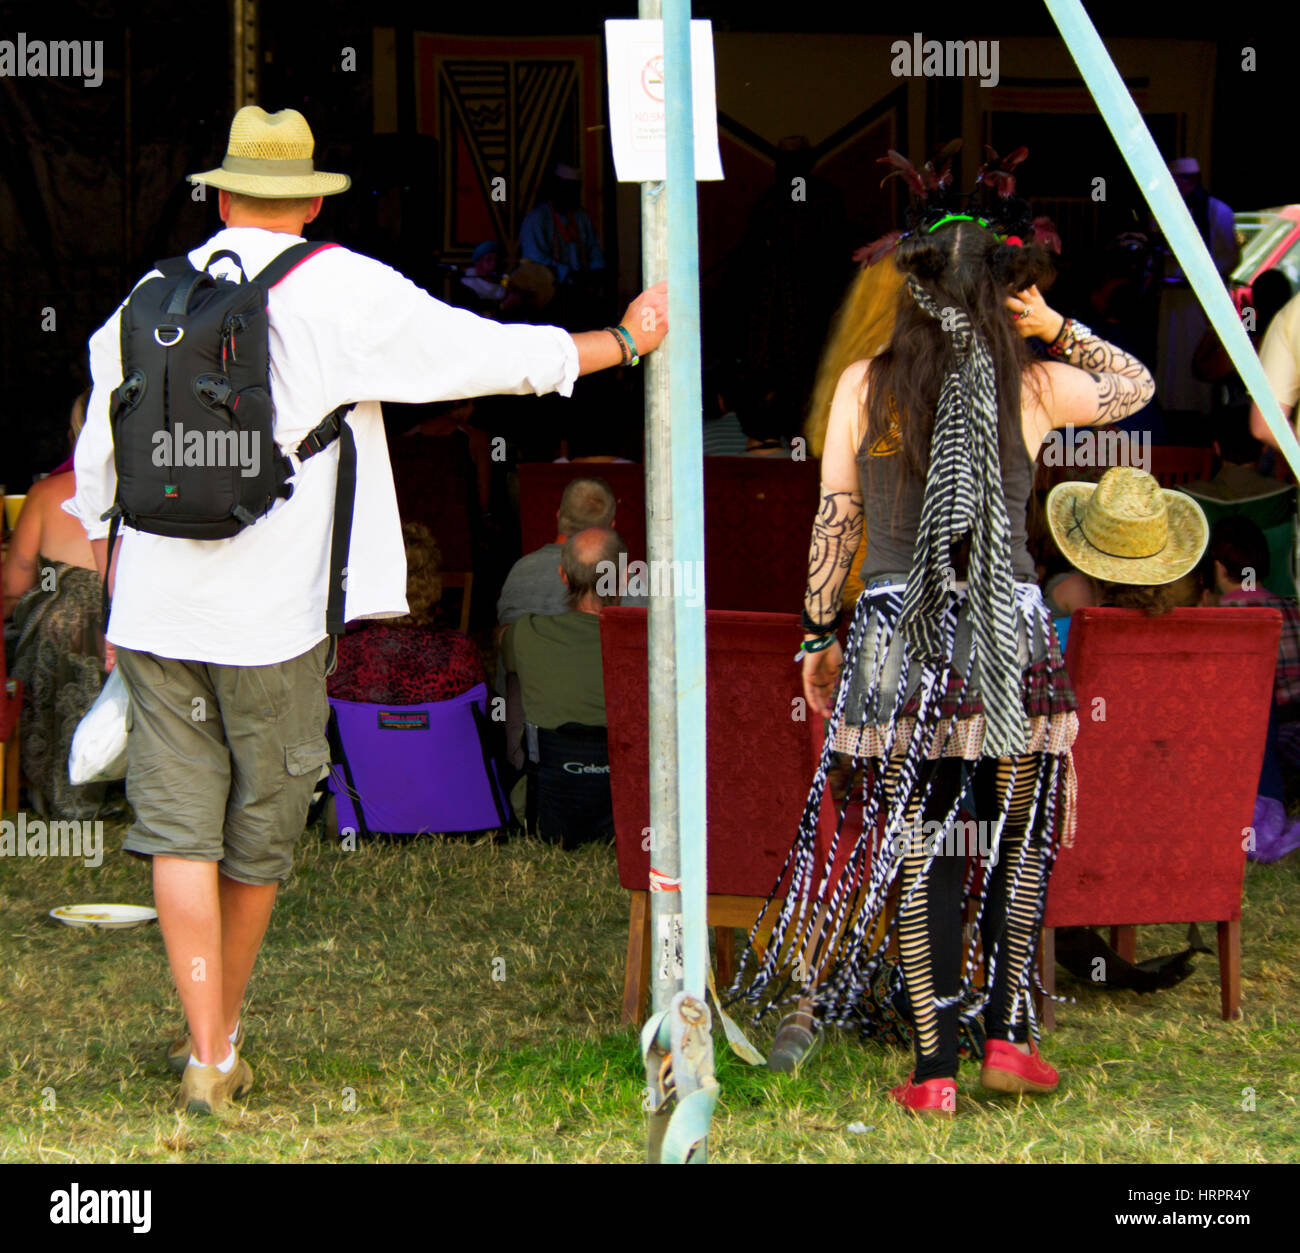 Two people watching an act at the 2010 WOMAD music festival. Stock Photo